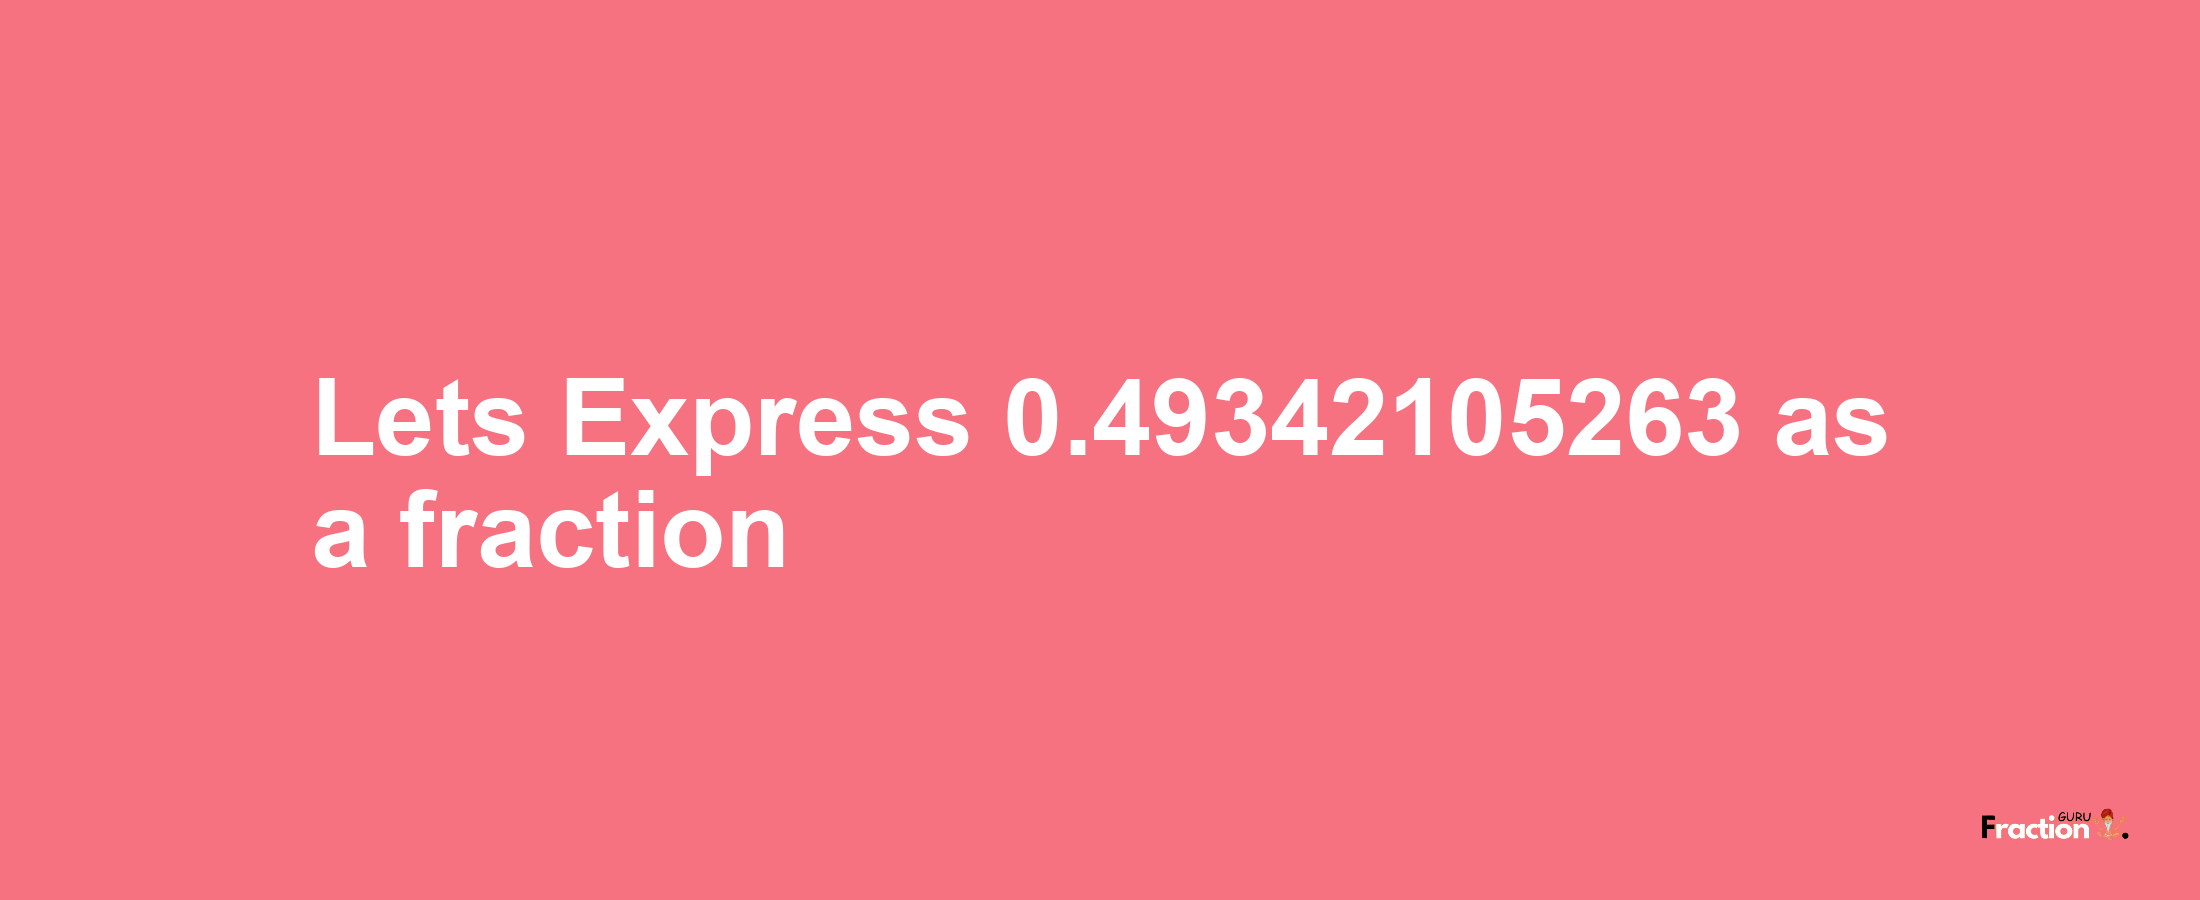 Lets Express 0.49342105263 as afraction